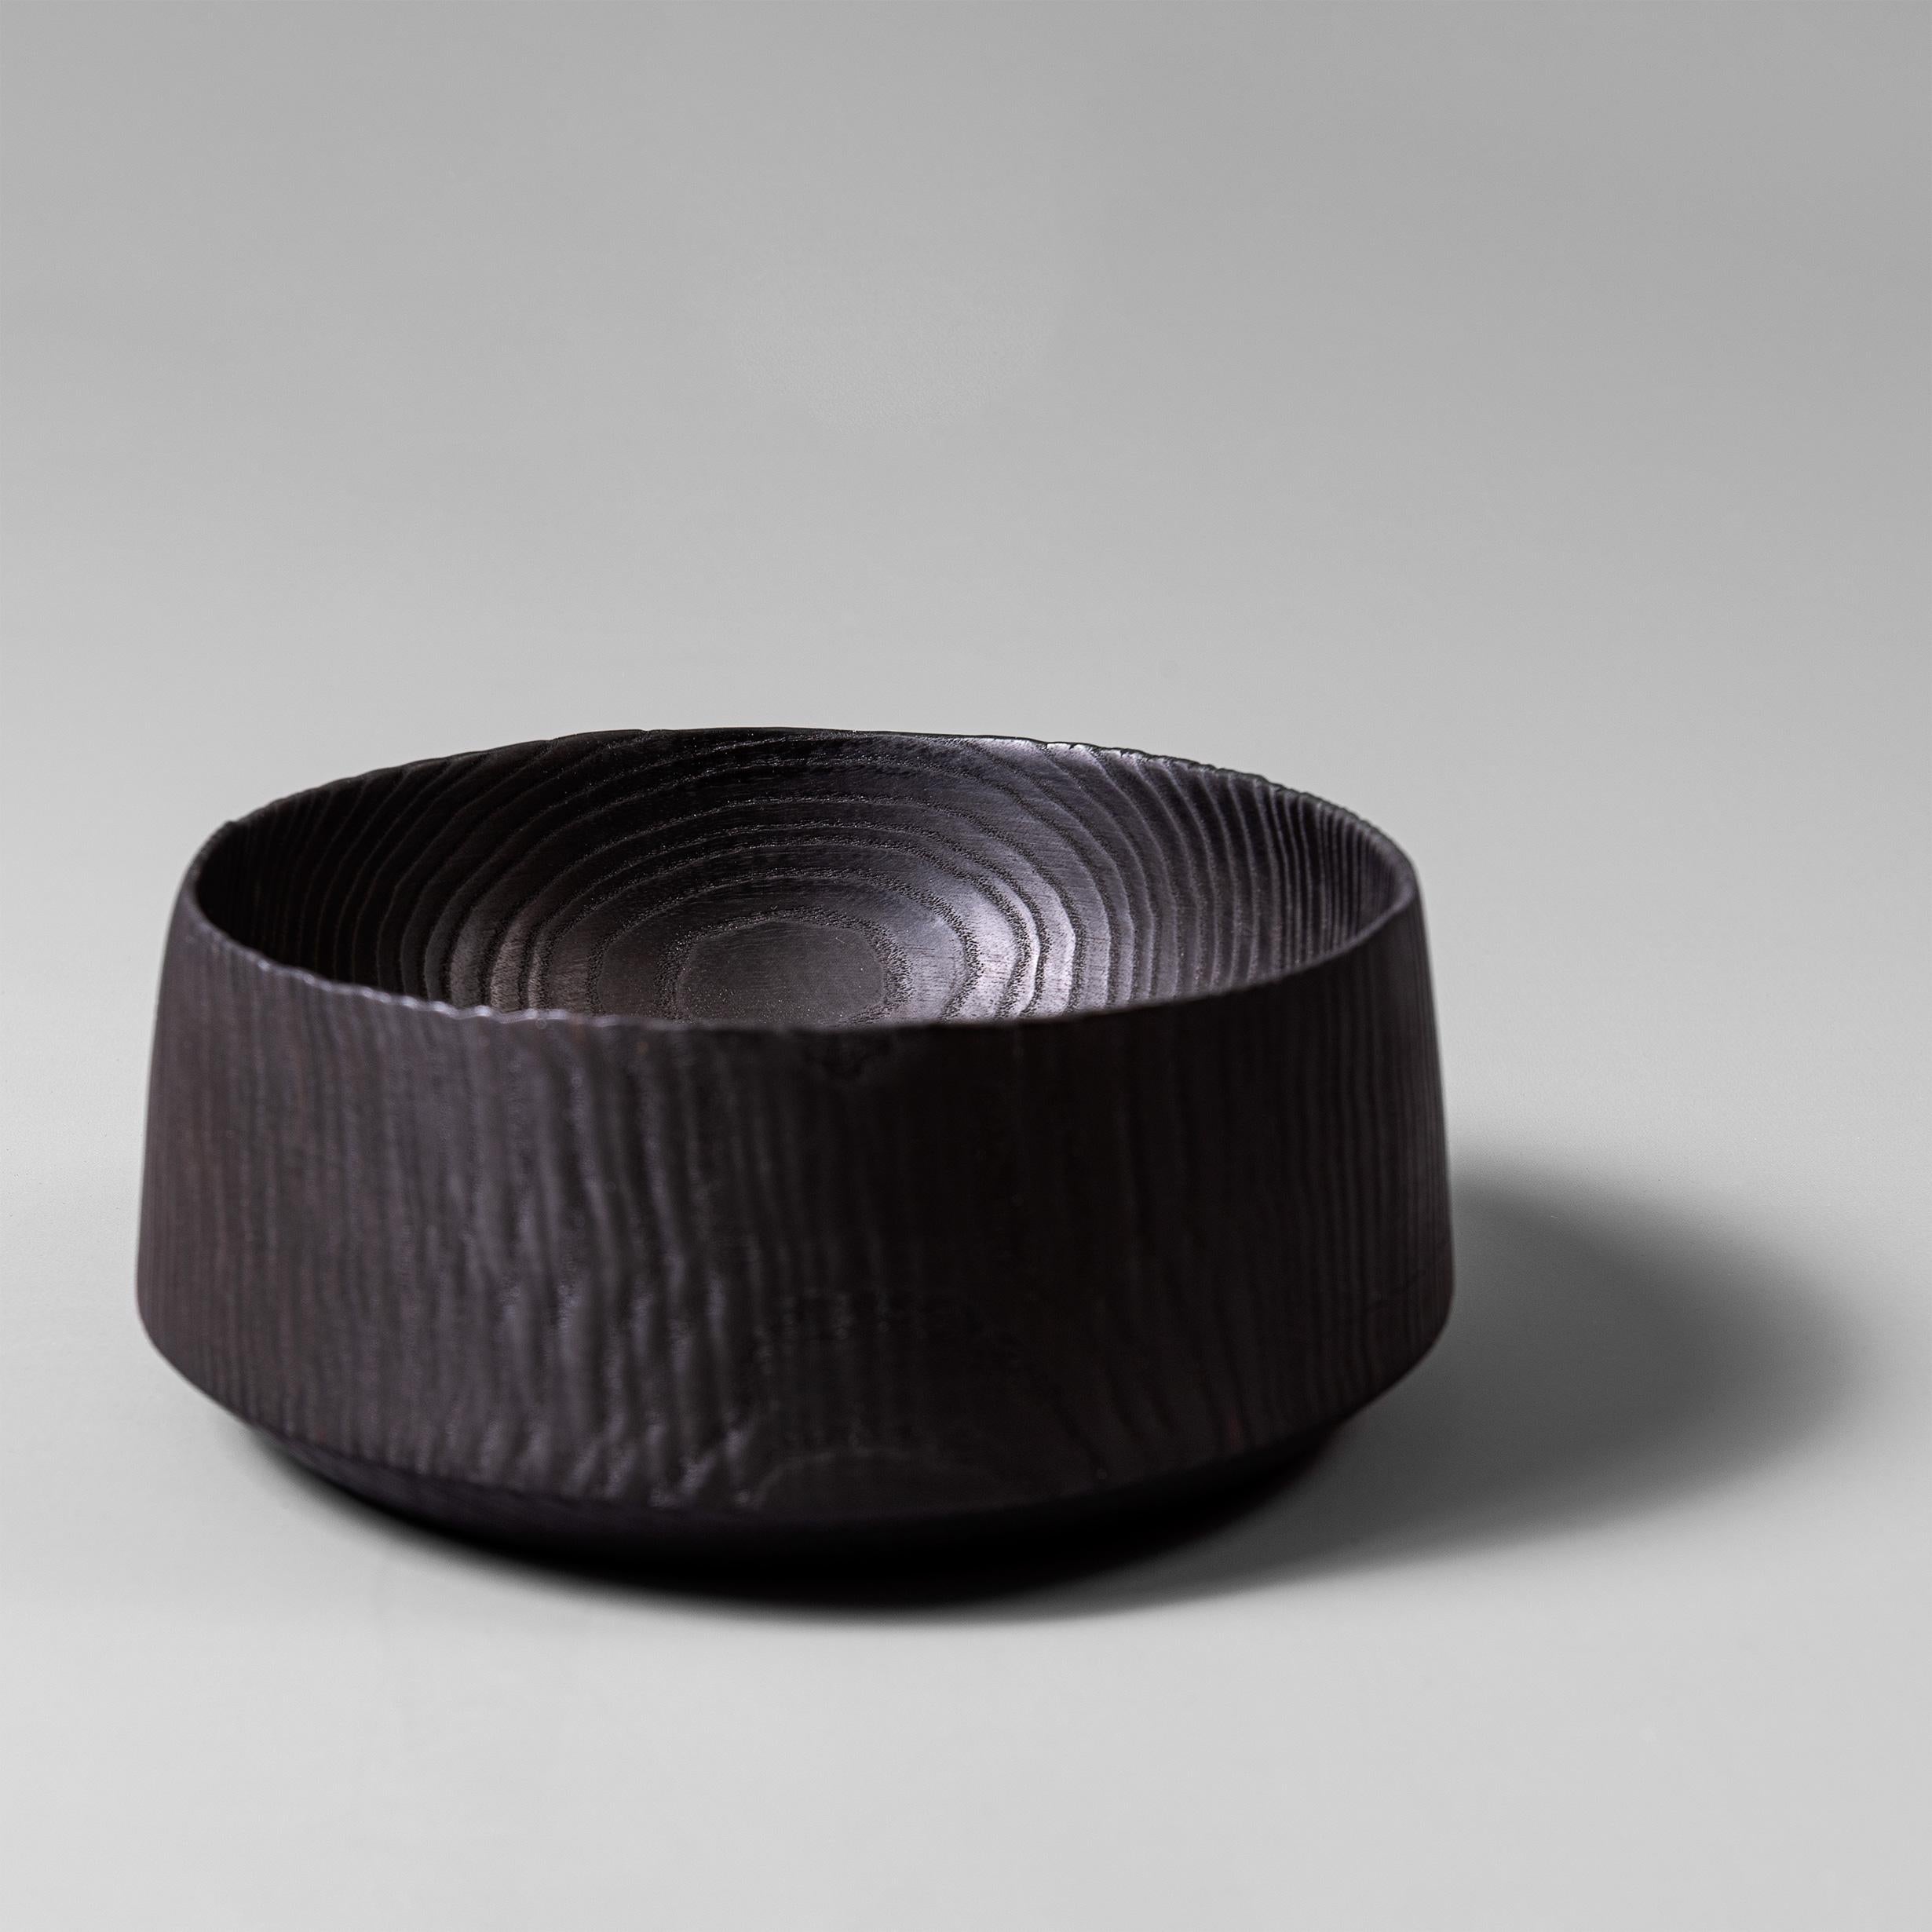 Fine traditionally hand-crafted and turned Ash Yakisugi platter - bowl. These are handmade to the very best quality in London using traditional techniques.
Finished in food safe oil.
Køben Bowl with Japanese Yakisugi Finish
A beautiful piece of